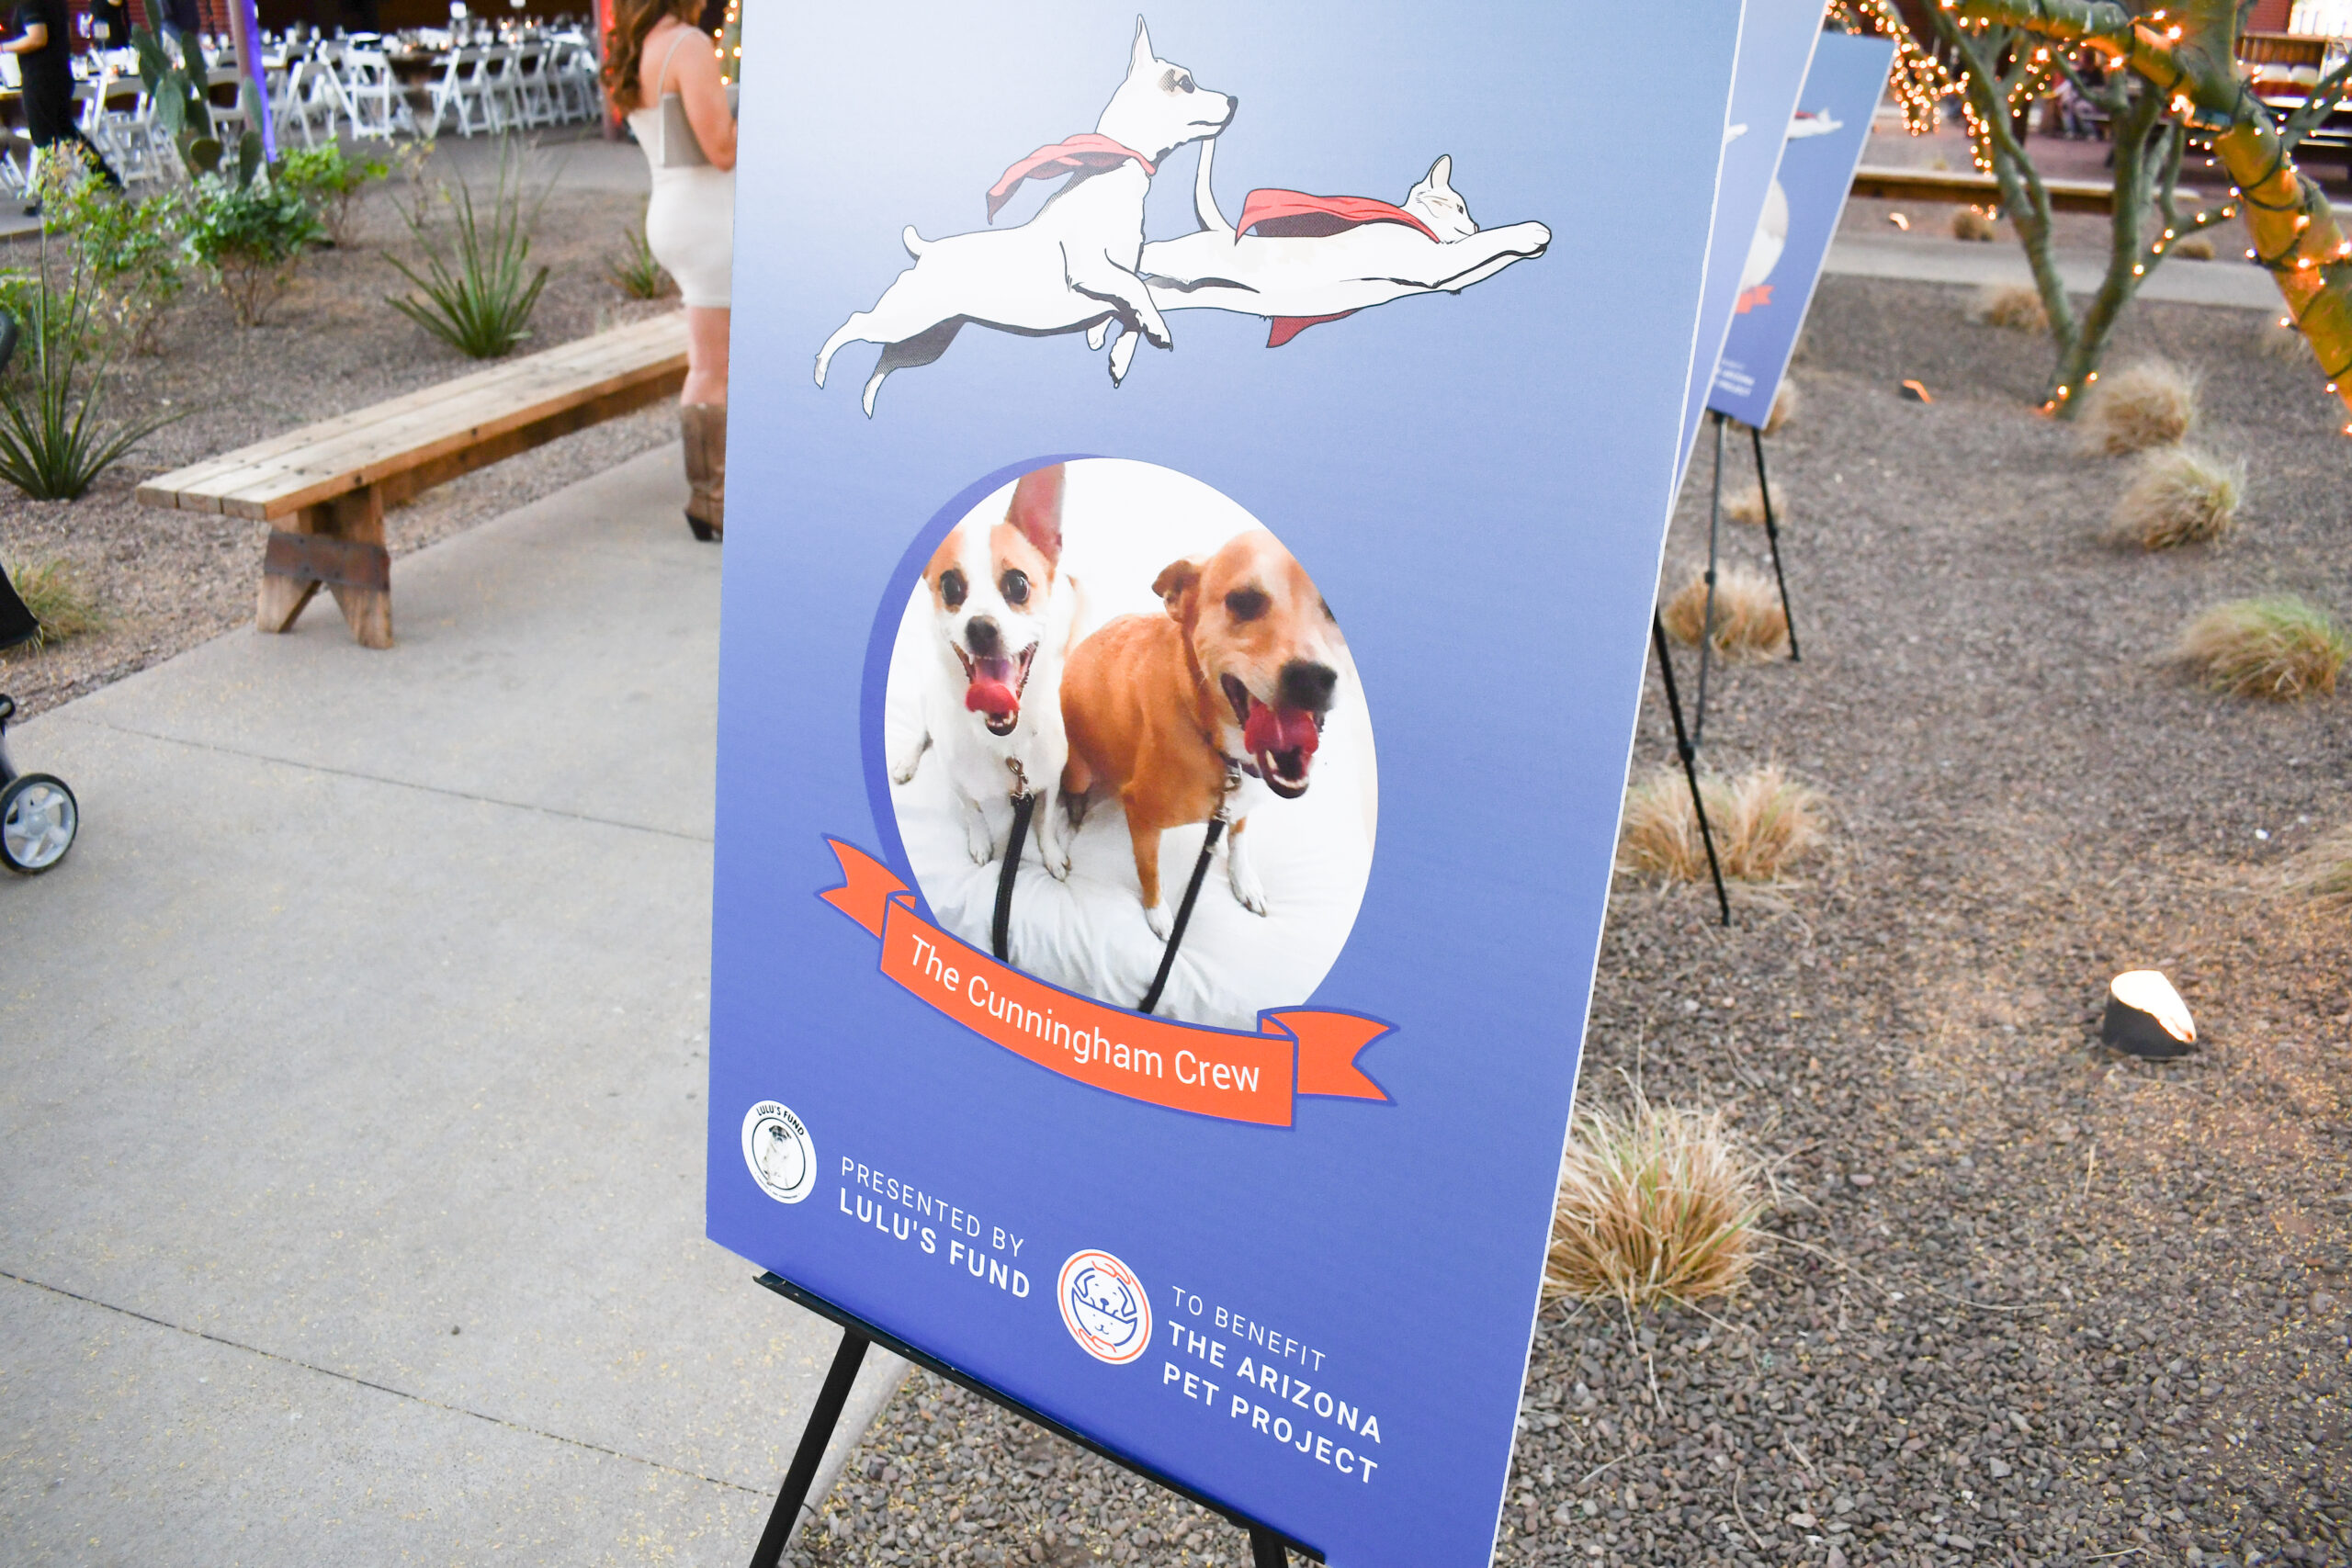 photo of a printed sign that reads The Cunningham Crew of the HERO award winner; also says Presented by Lulu's Fund and To Benefit The Arizona Pet Project